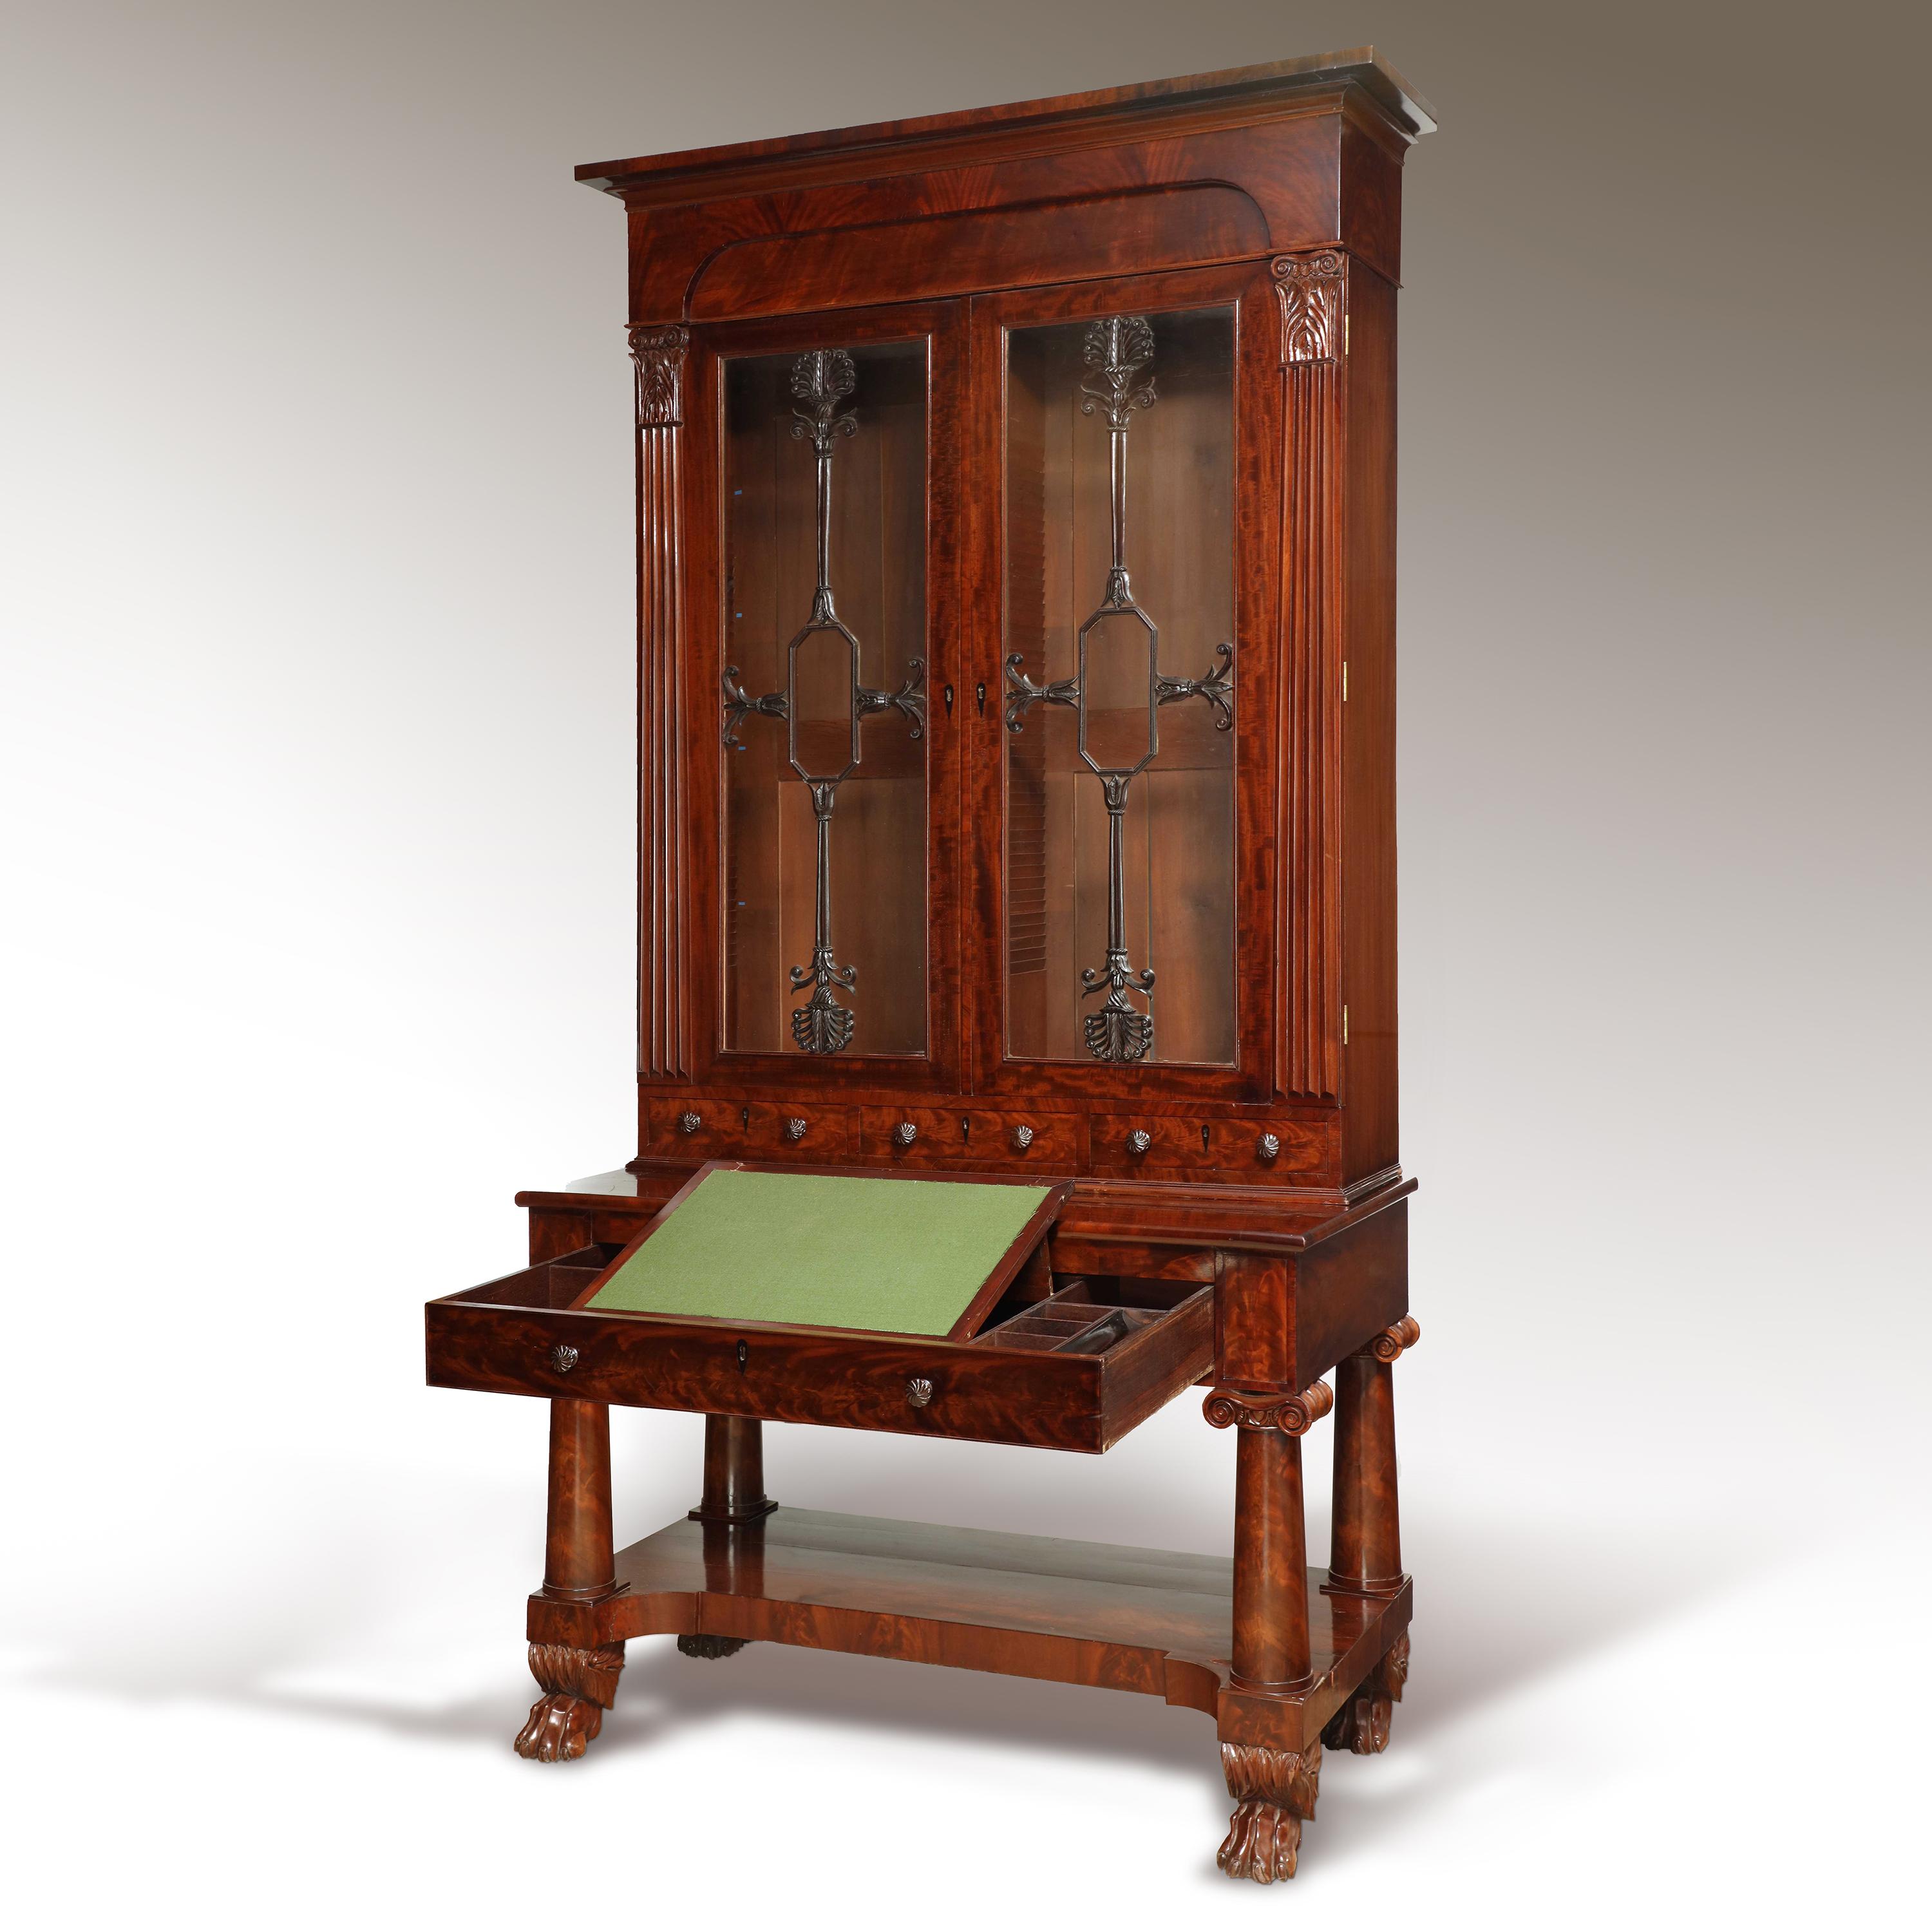 American Classical Exceptional Mahogany Bureau Bookcase from Baltimore Maryland, circa 1830 For Sale